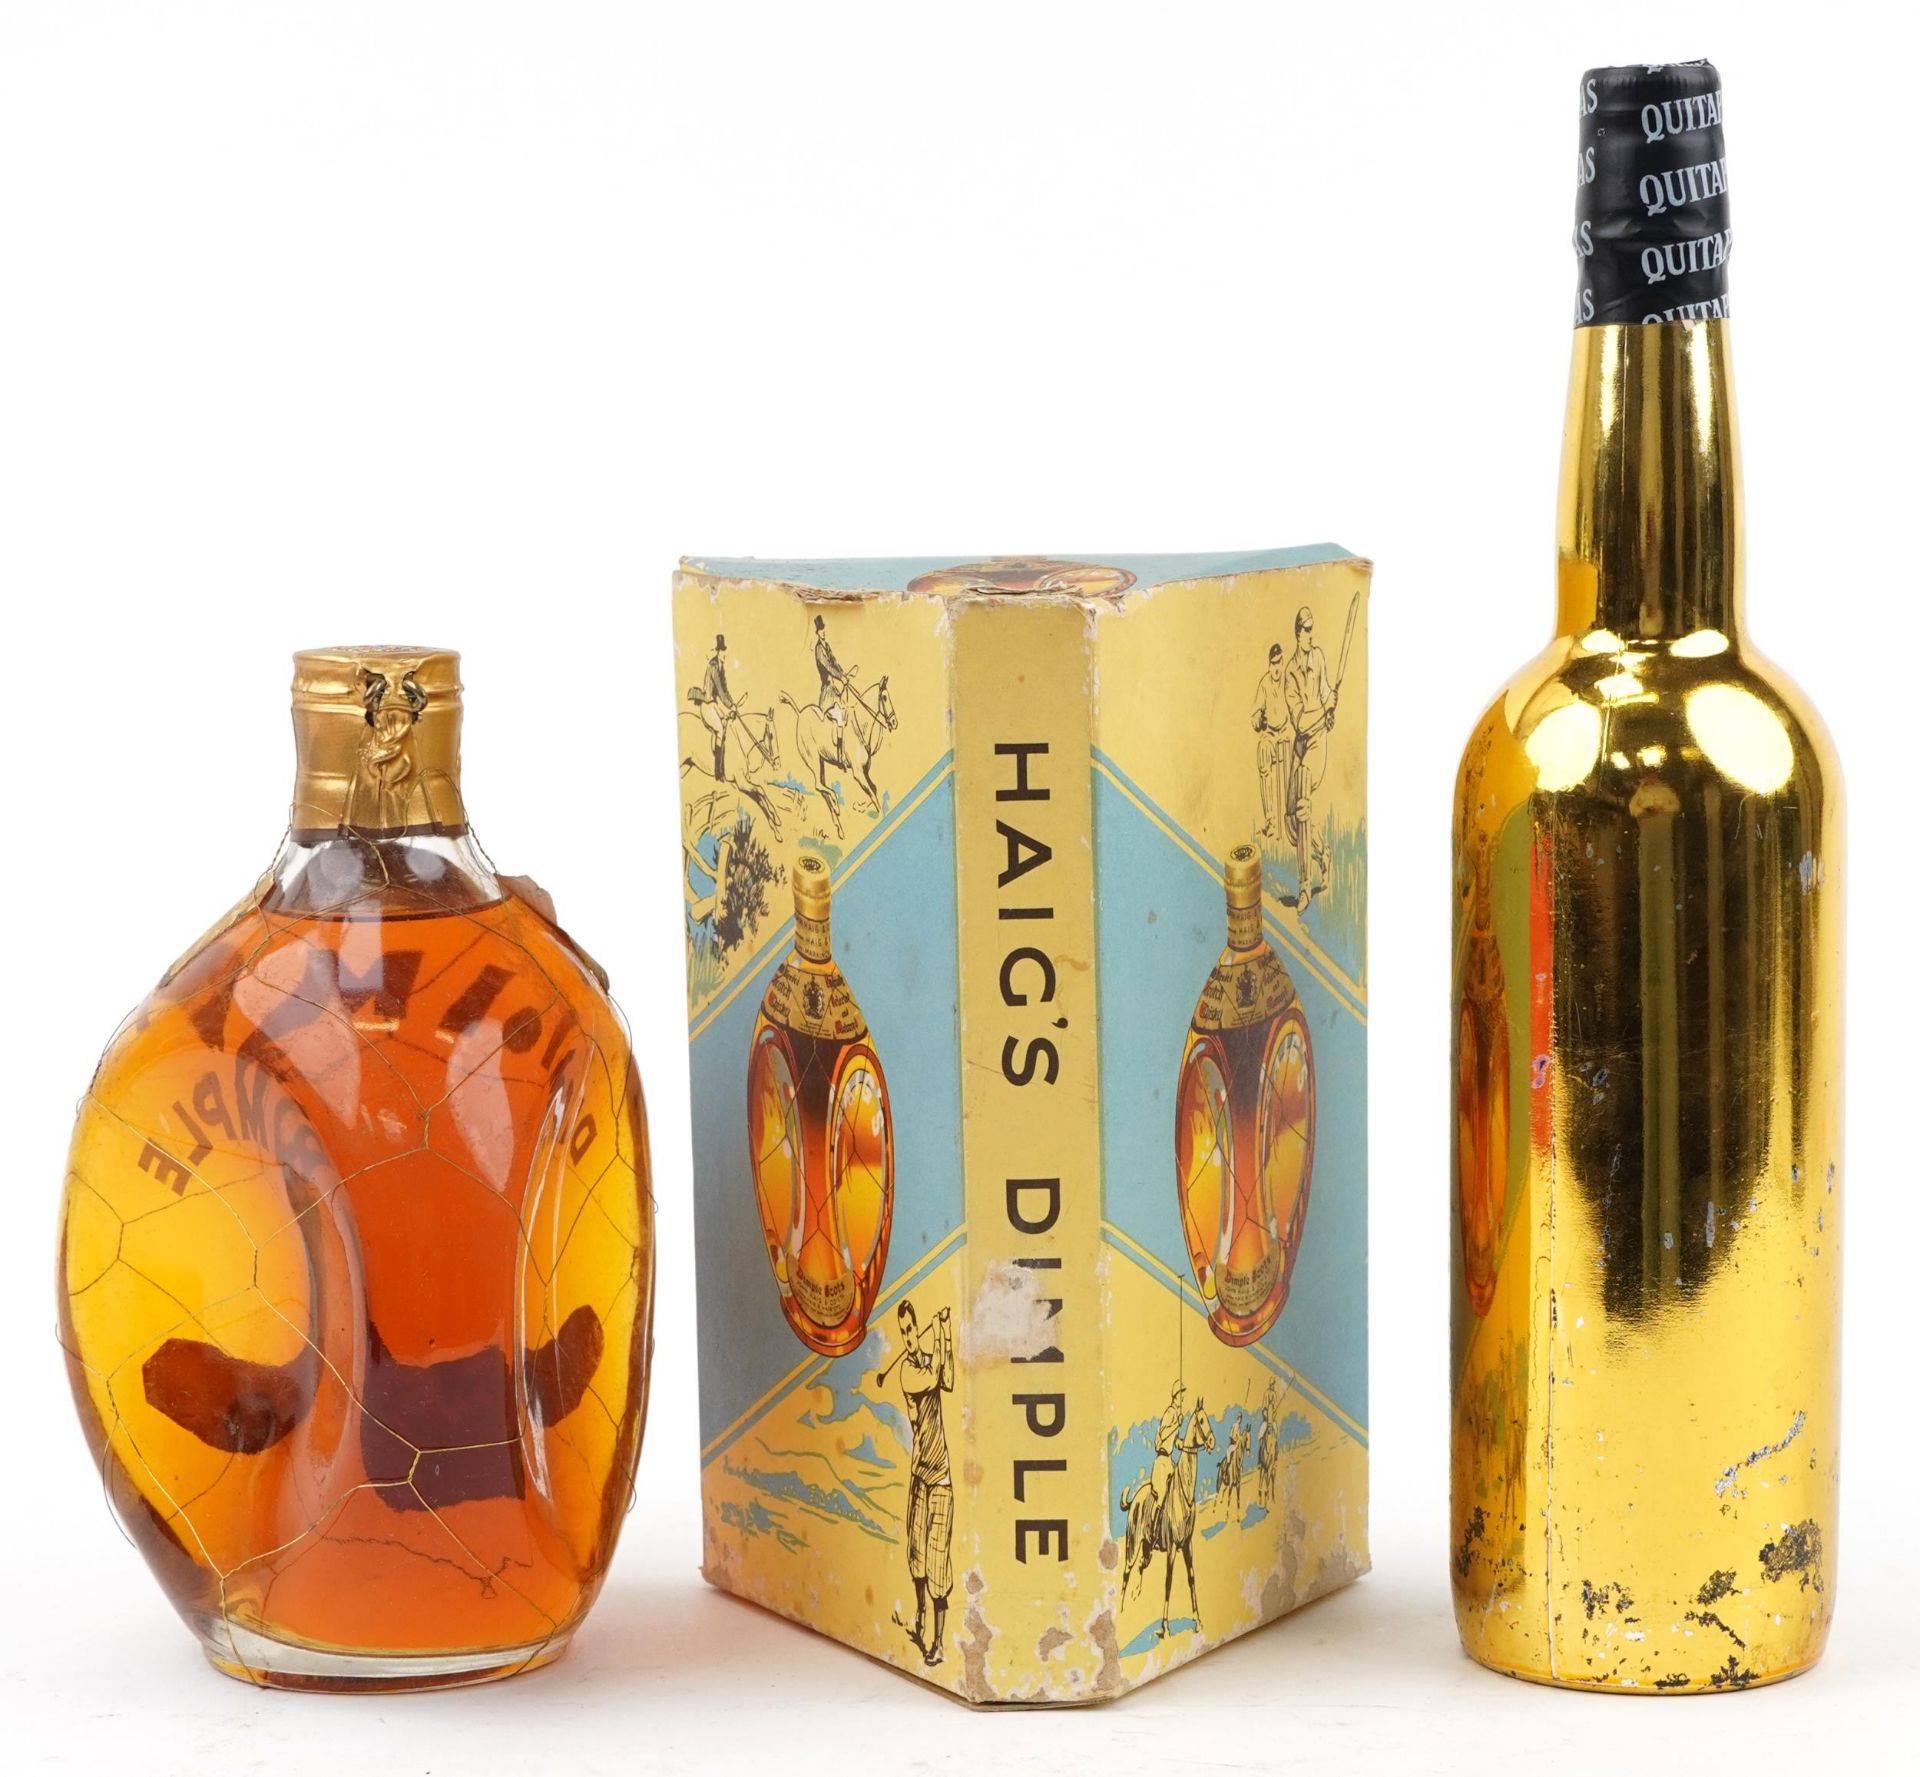 Vintage bottle of Haig's Dimple Scotch whisky and a bottle of Quitapenas Malaga wine : For further - Image 2 of 3